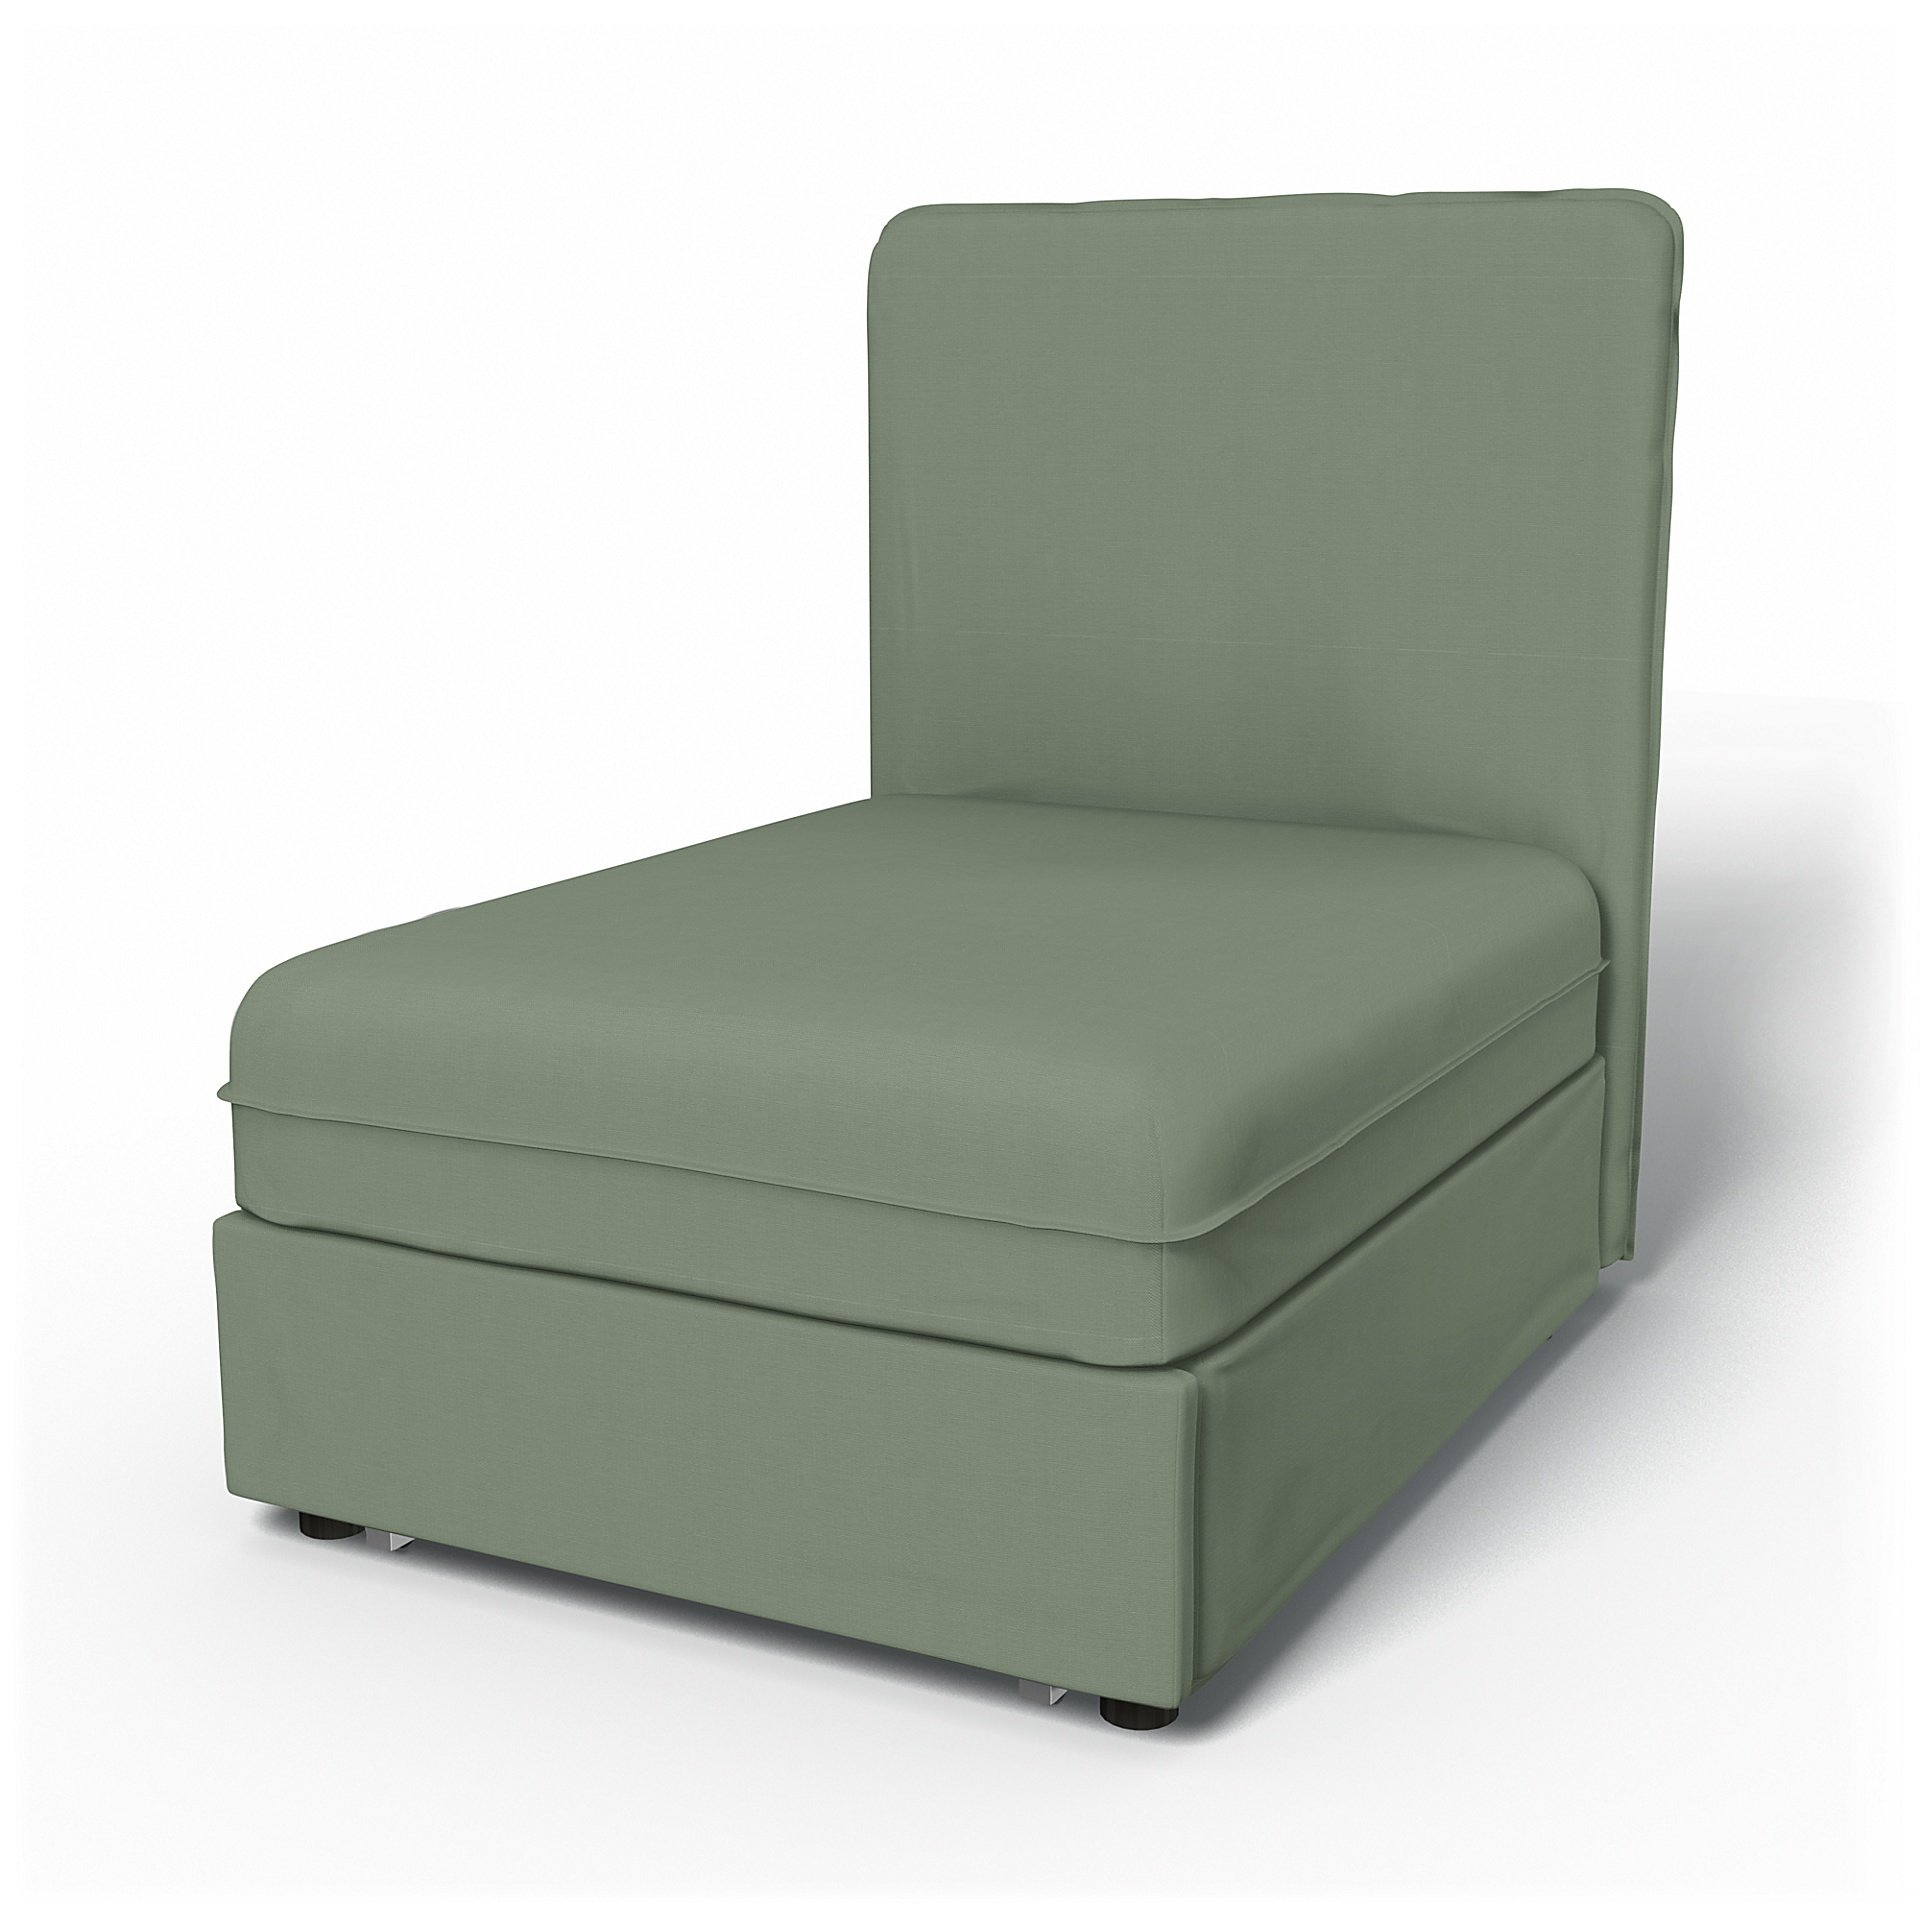 IKEA - Vallentuna Seat Module with High Back Sofa Bed Cover (80x100x46cm), Seagrass, Cotton - Bemz